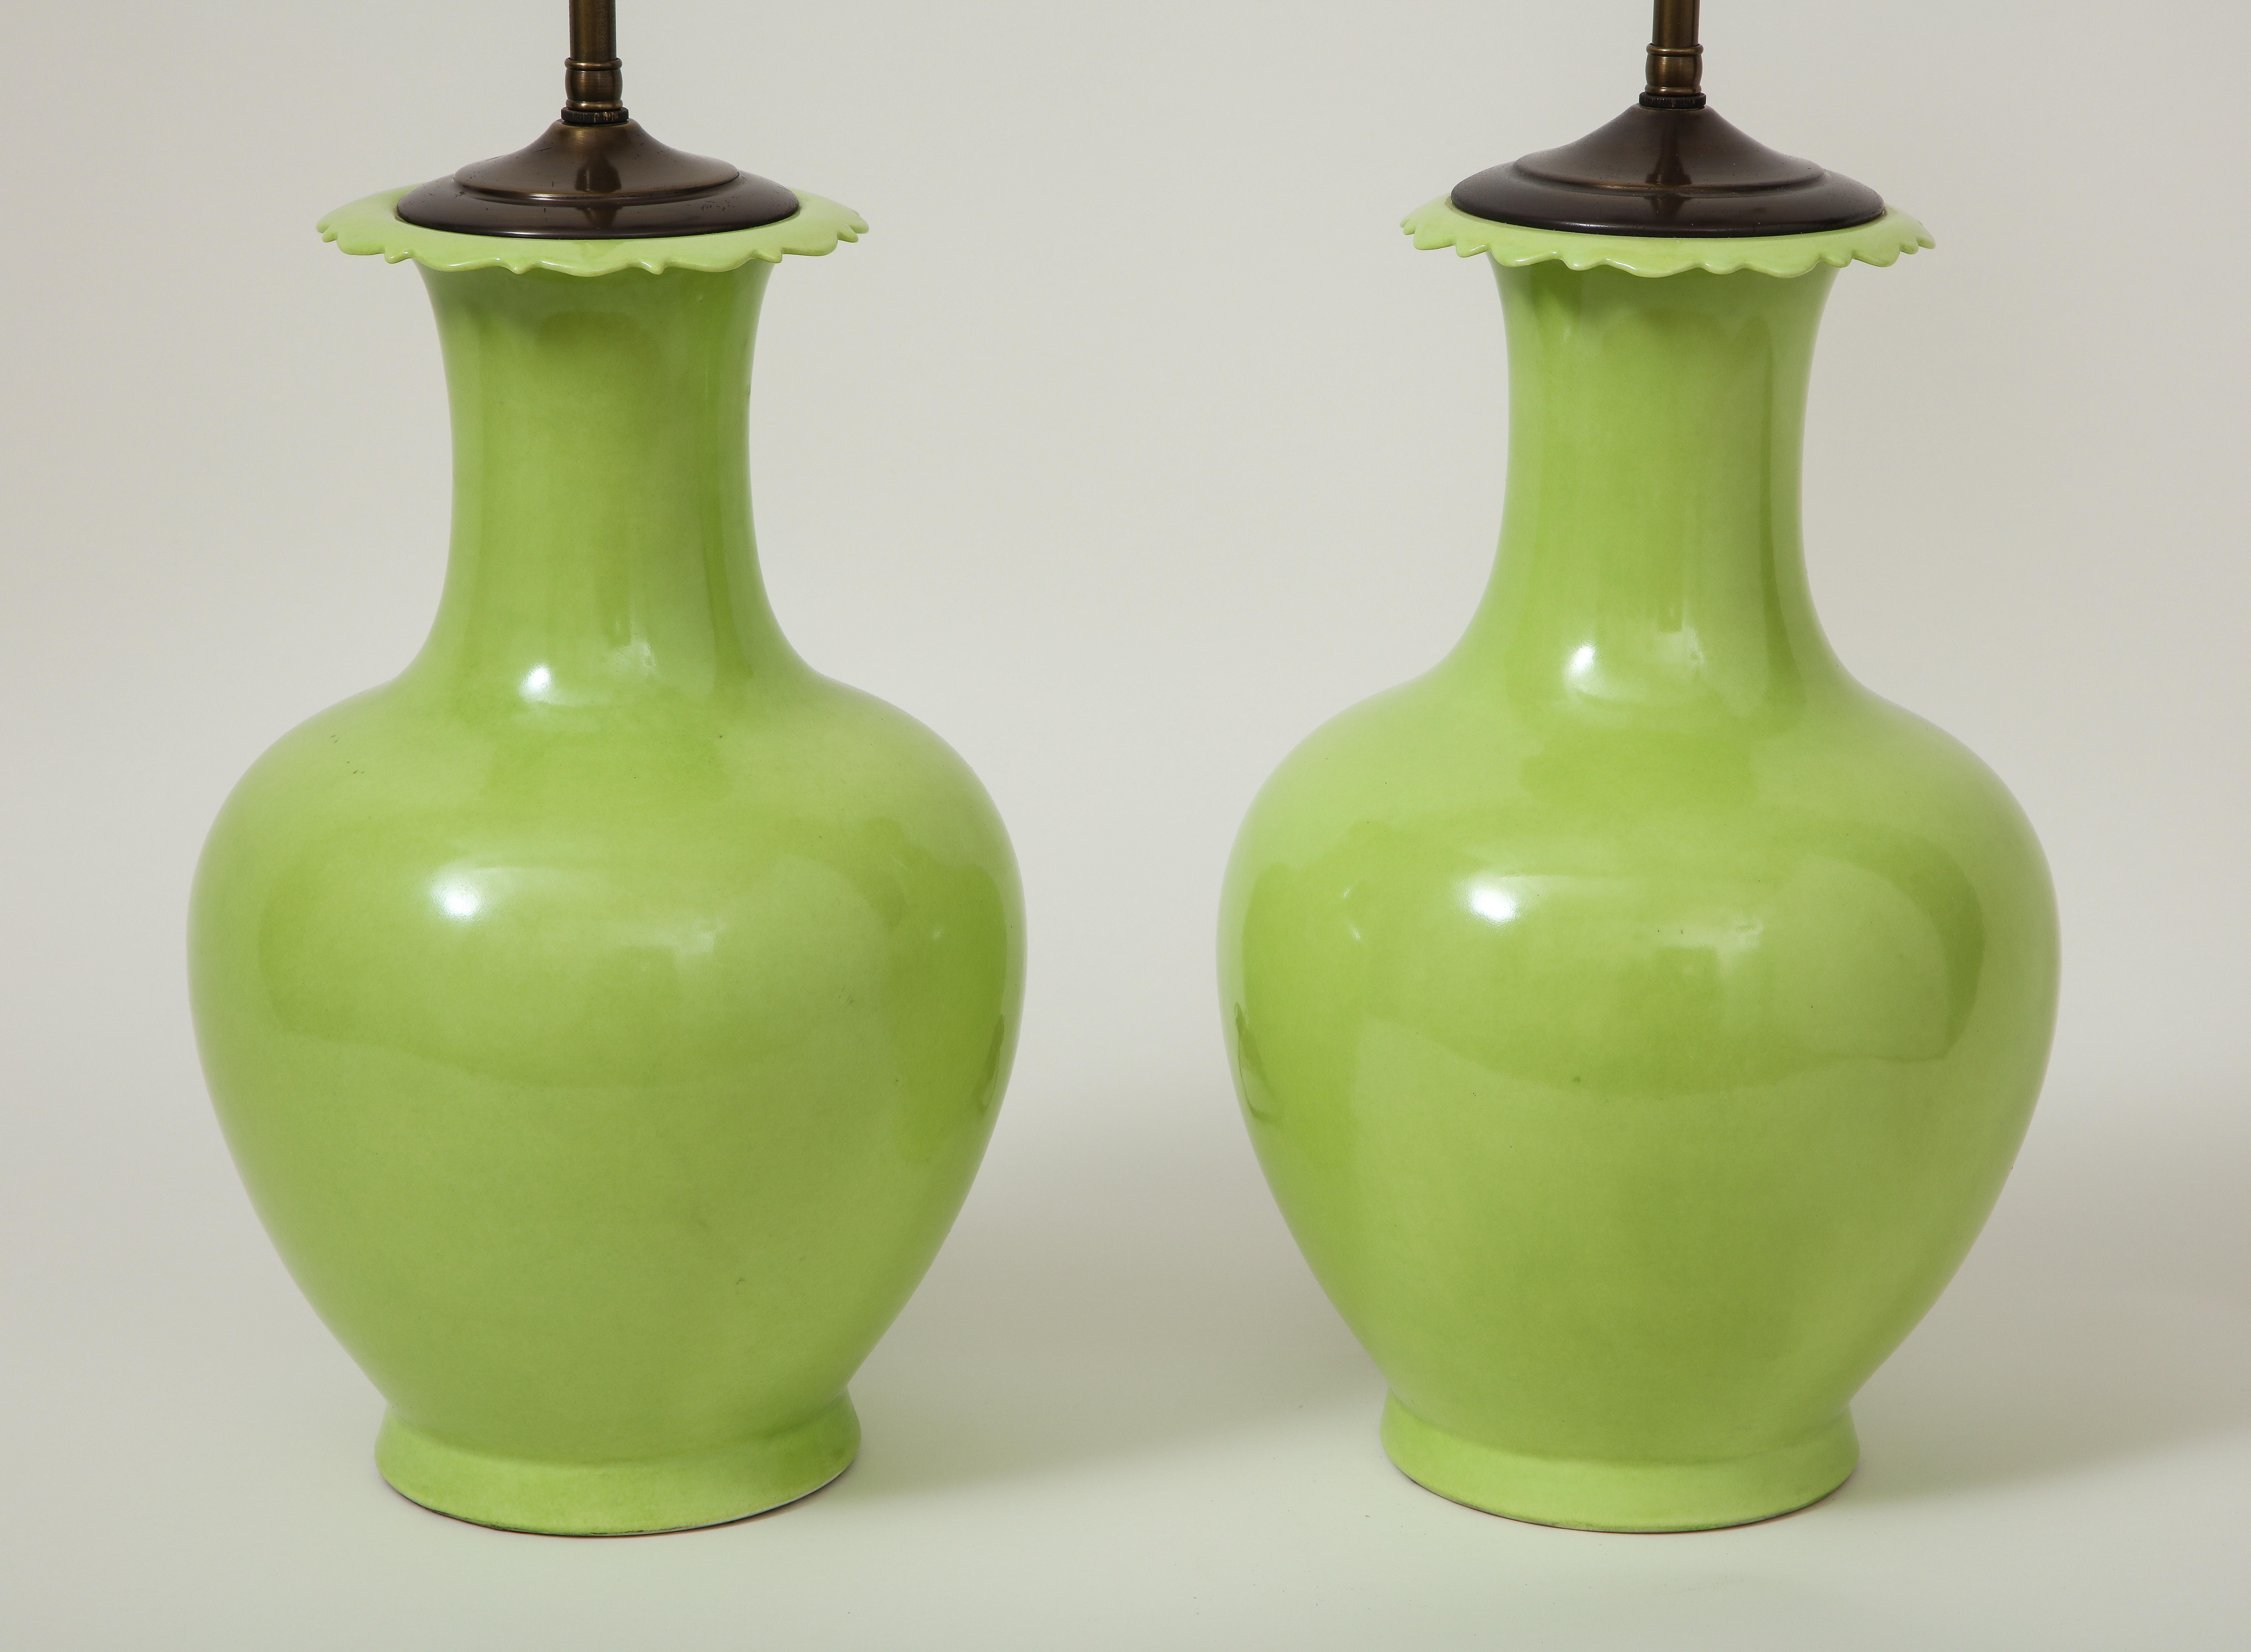 Each of baluster form with scalloped rim, fitted with an adjustable rod and two-light sockets. Height to top of vase is 14.75